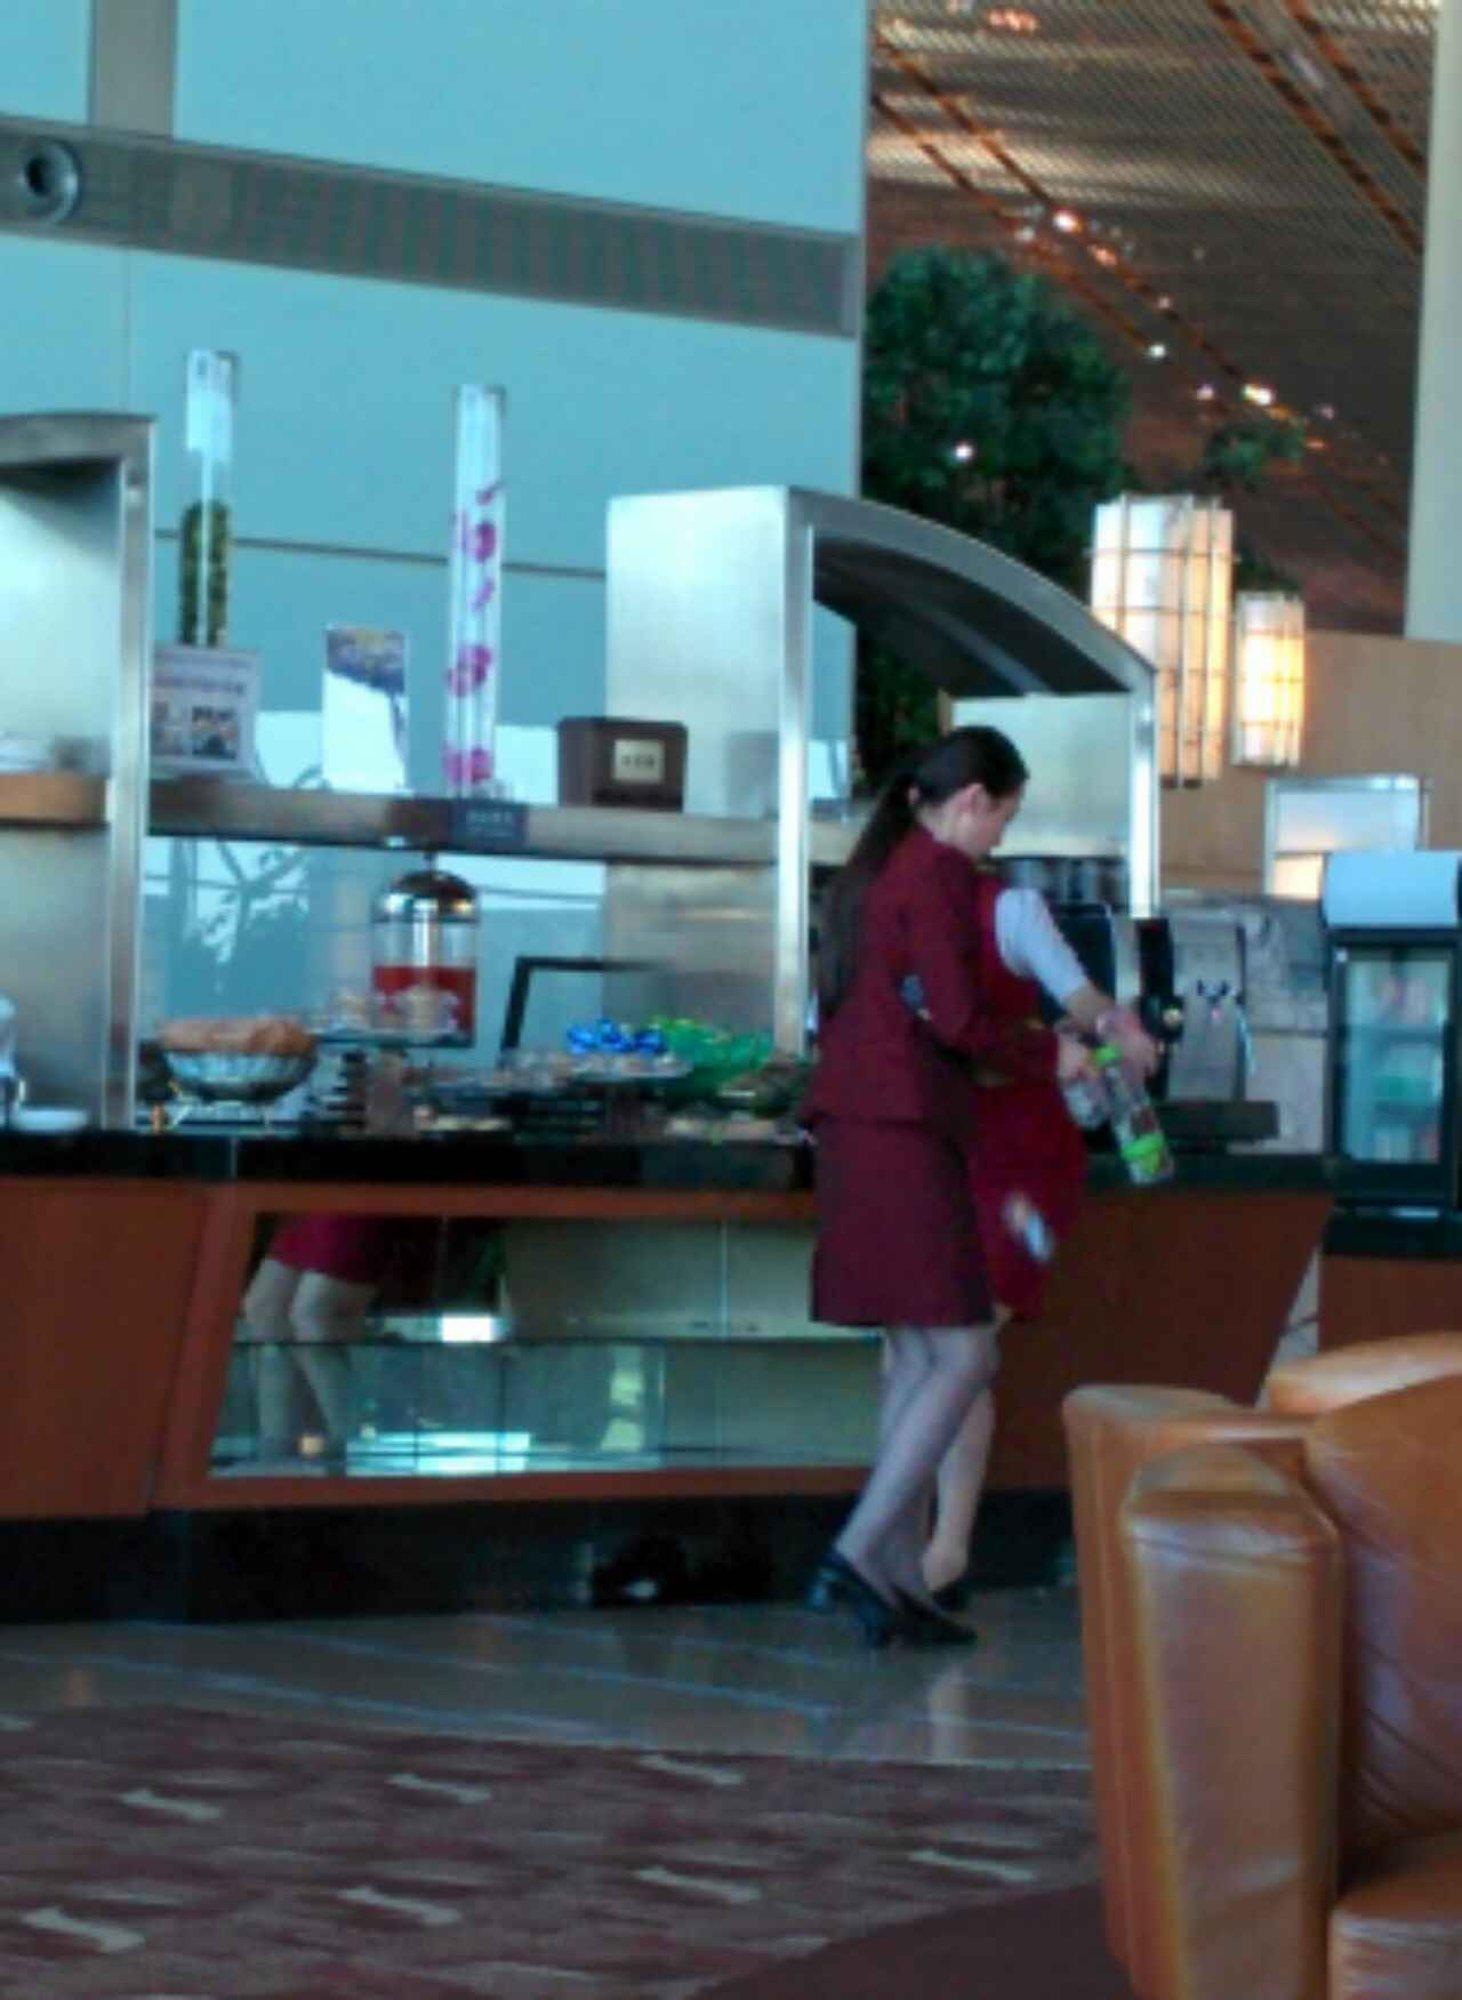 Air China International First Class Lounge image 26 of 38